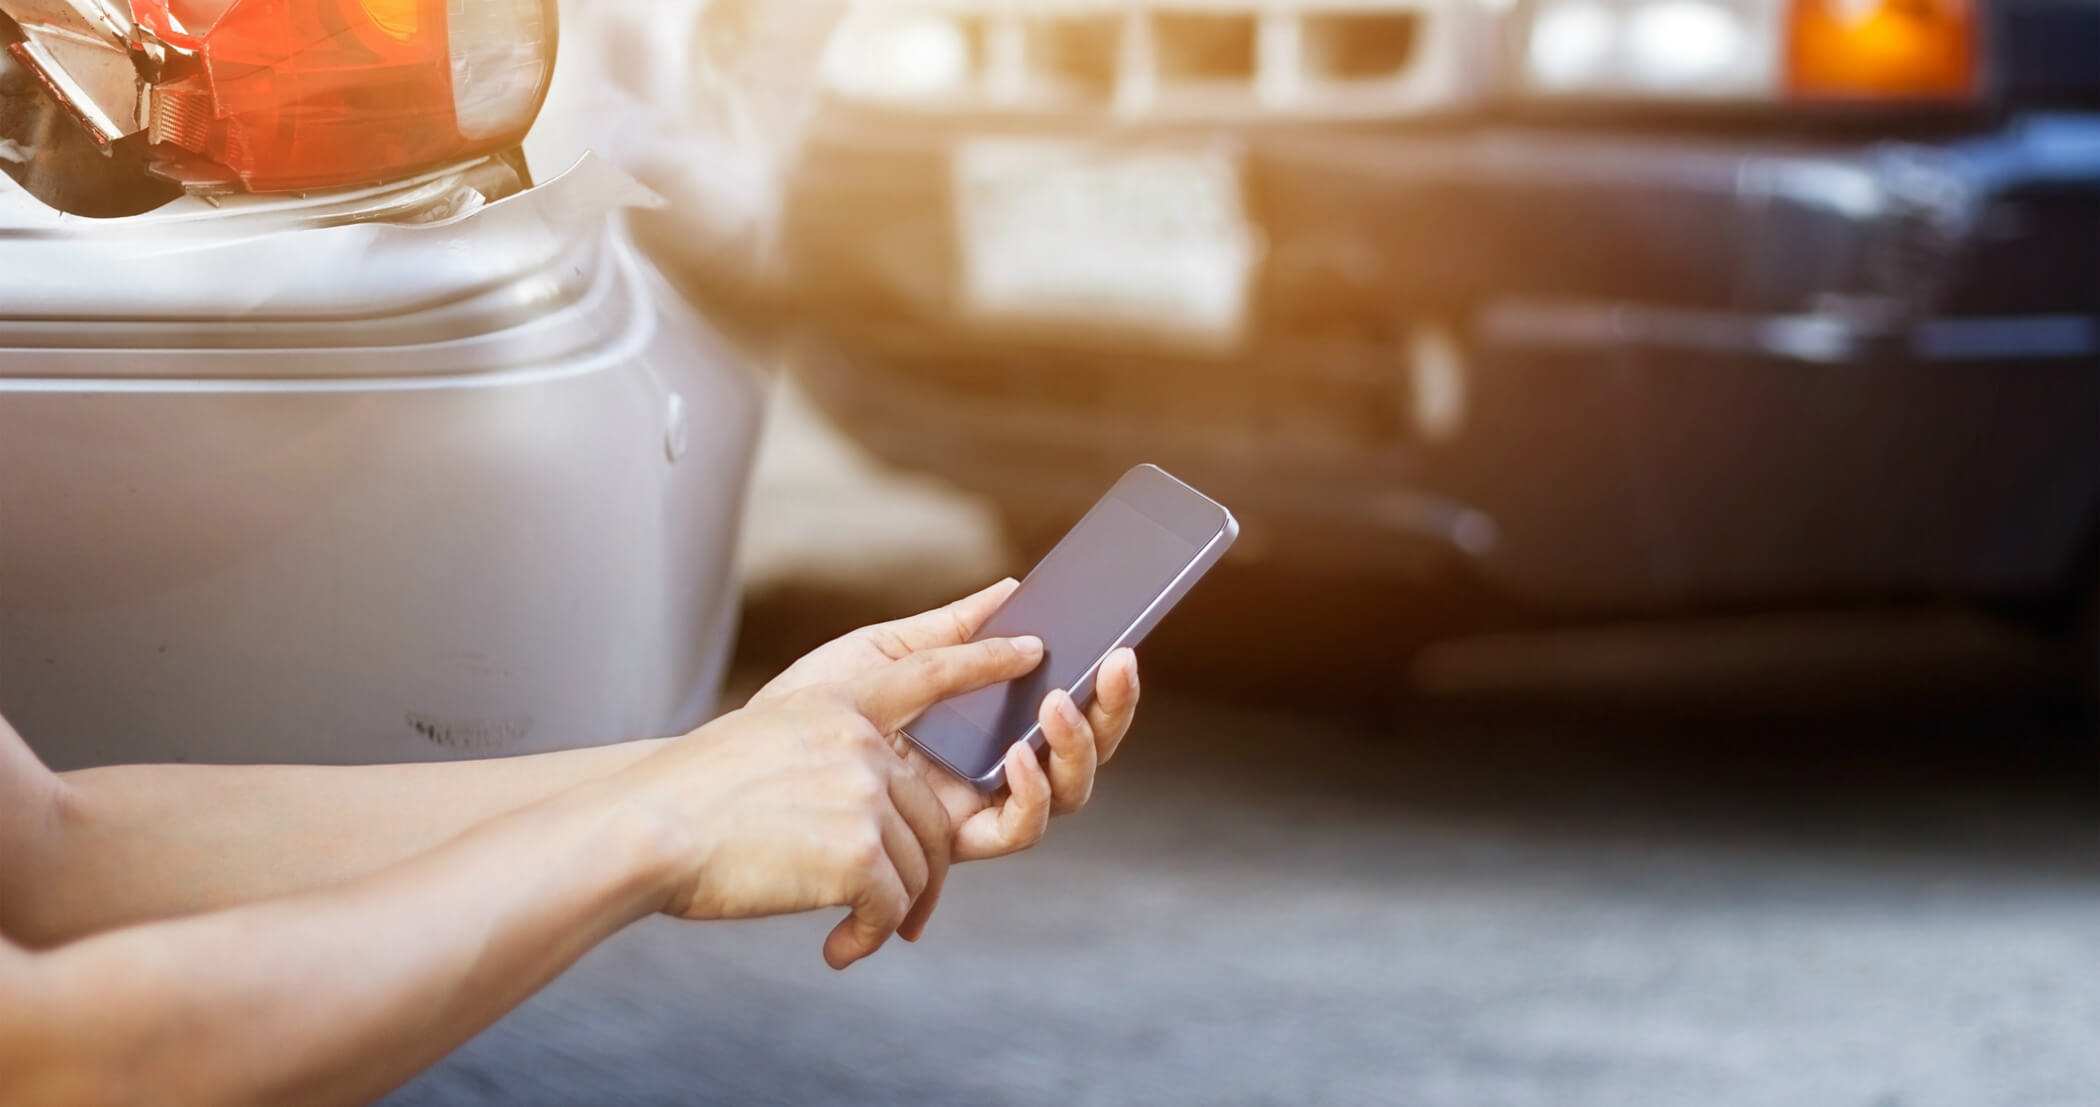 Woman holding a smartphone and dialing, in front of two vehicles that have been involved in an accident.